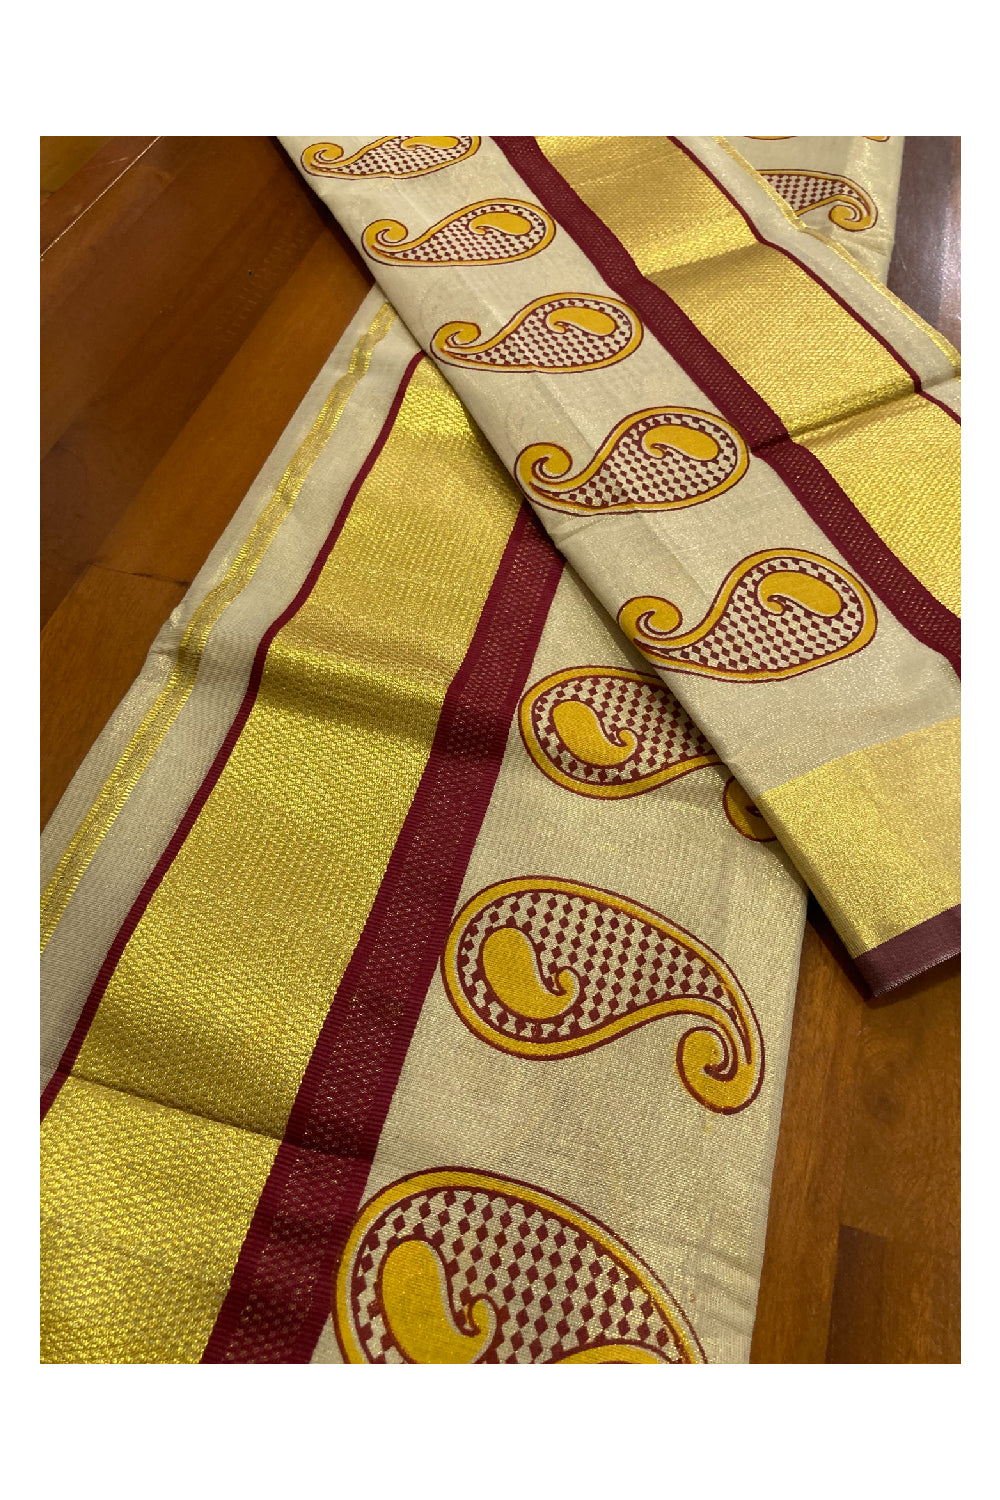 Tissue Set Mundu with Hand Block Printed Red and Yellow Peacock Design